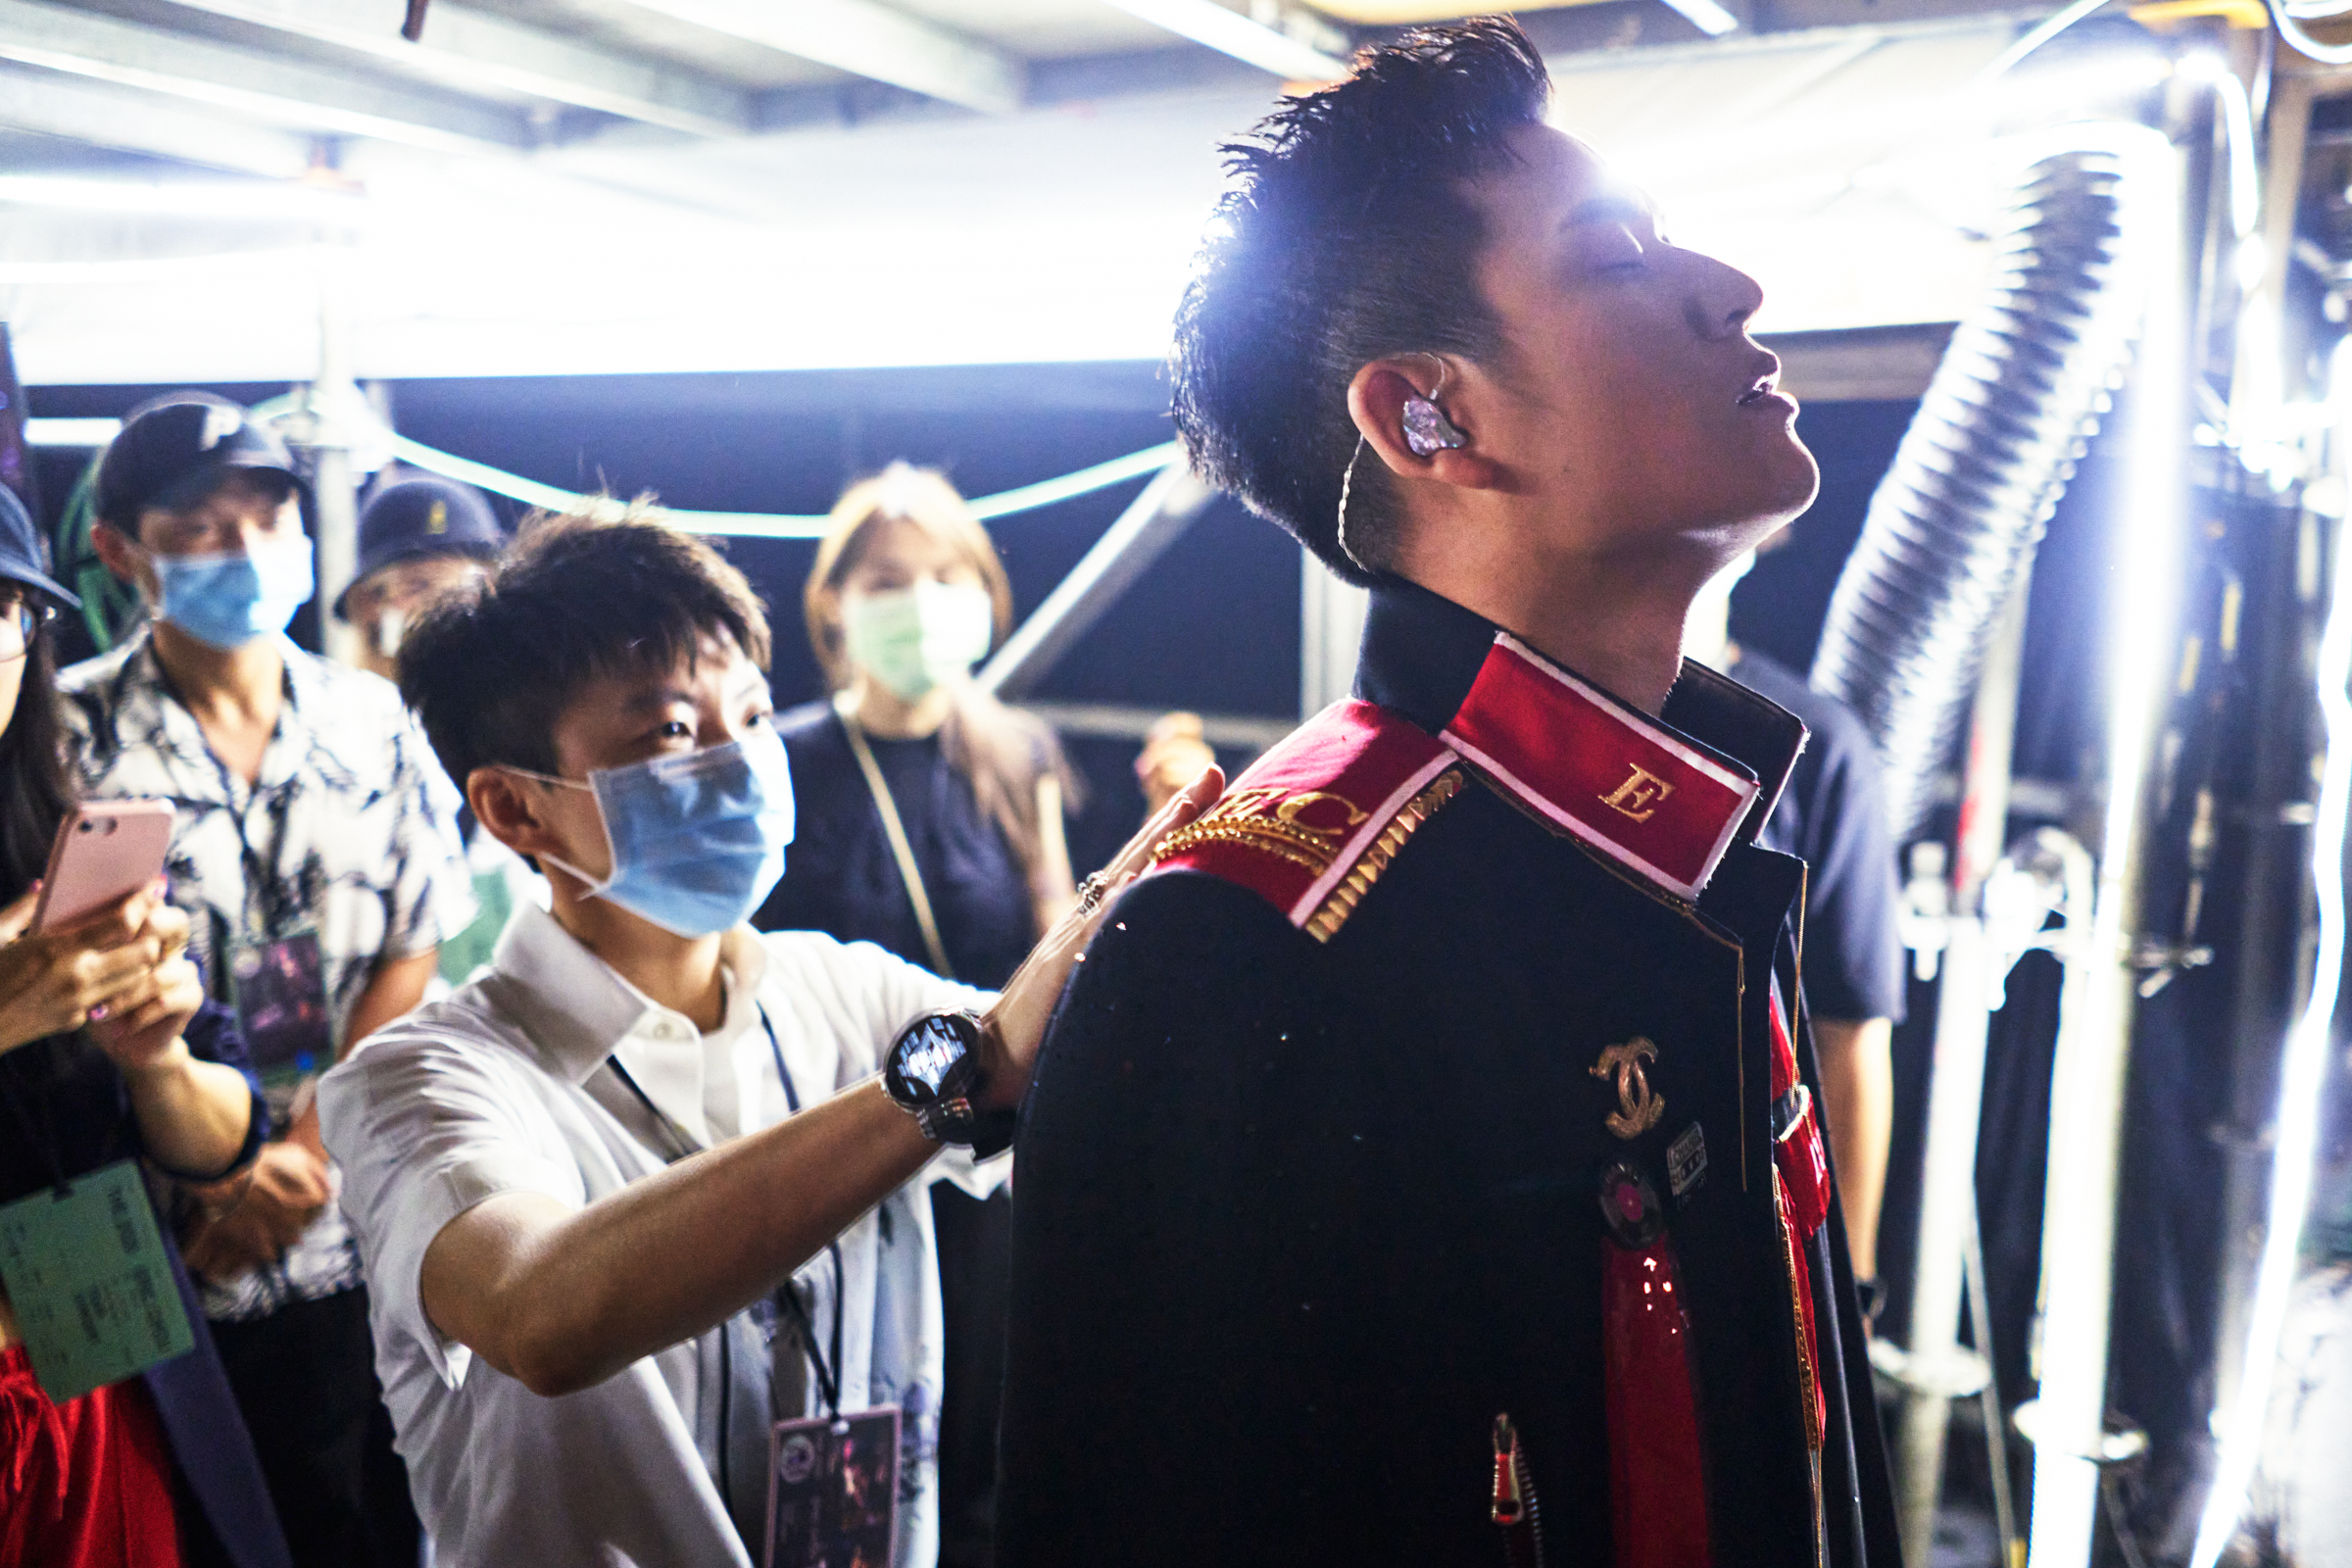 Chou receives finishing touches from his manager Reese Hsu before going onstage (An Rong Xu for TIME)